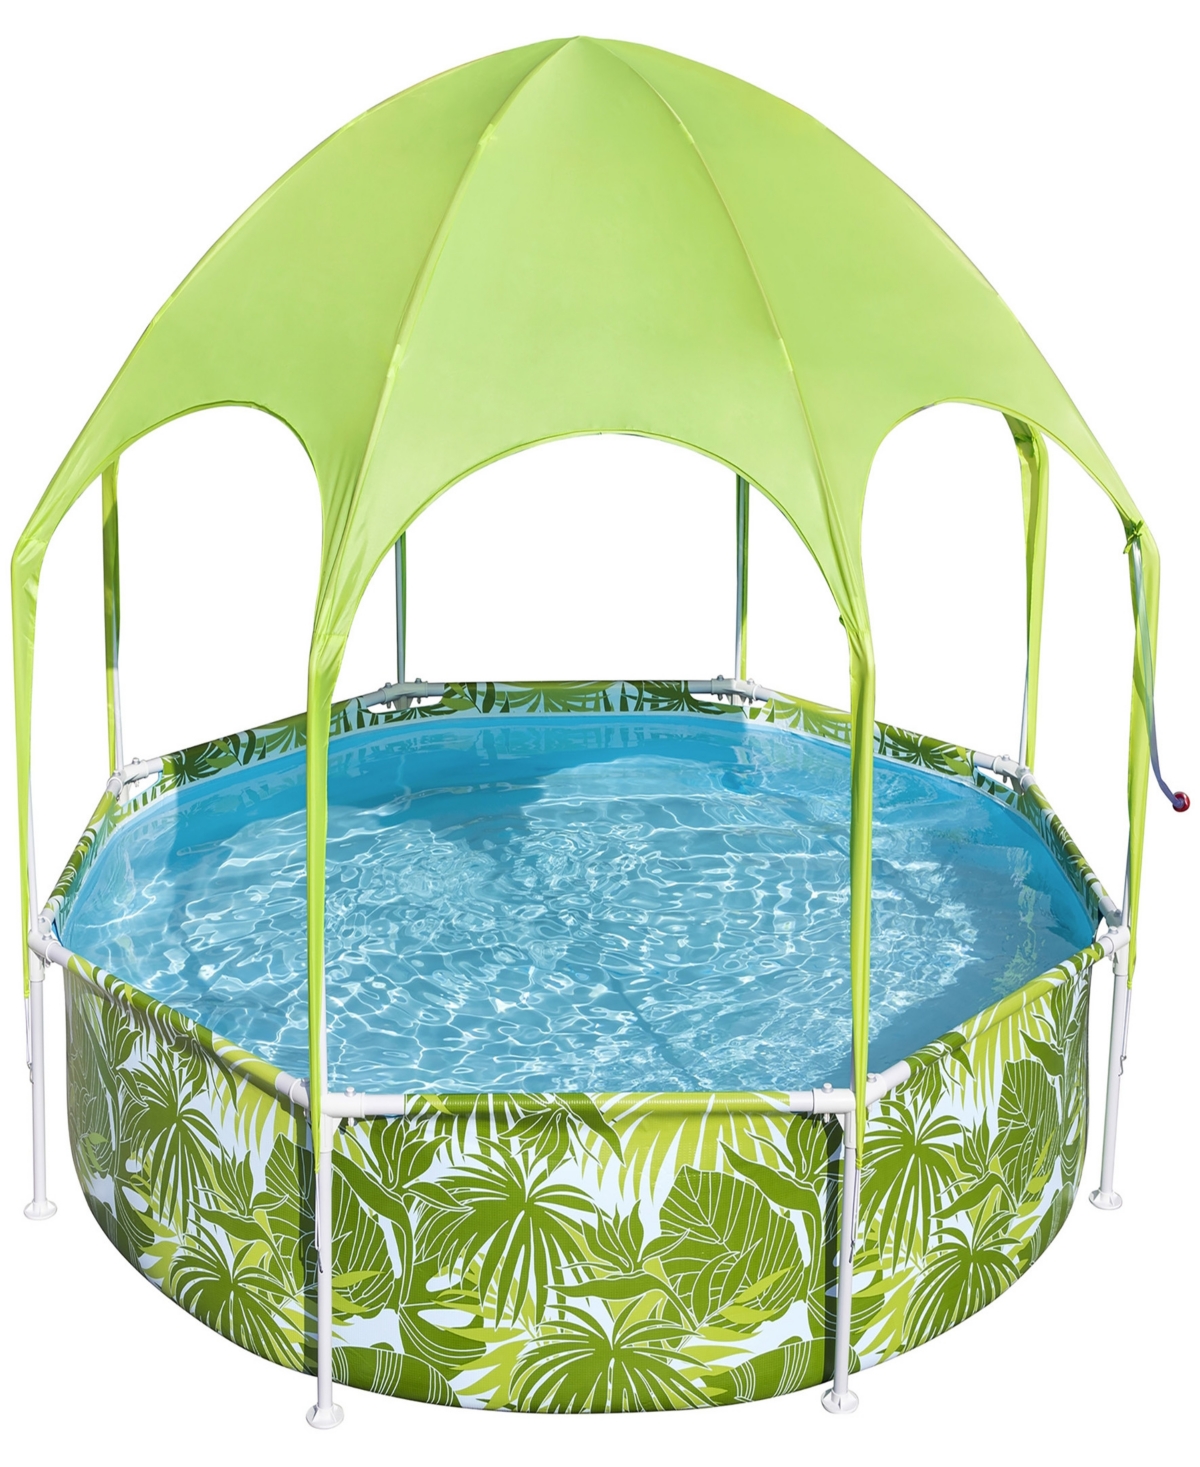 H2ogo Snow Splash-in-shade Play Pool 8' X 20" 446 , Uv Safe Shade Cover With Water Mister, Kids Pool In Multi